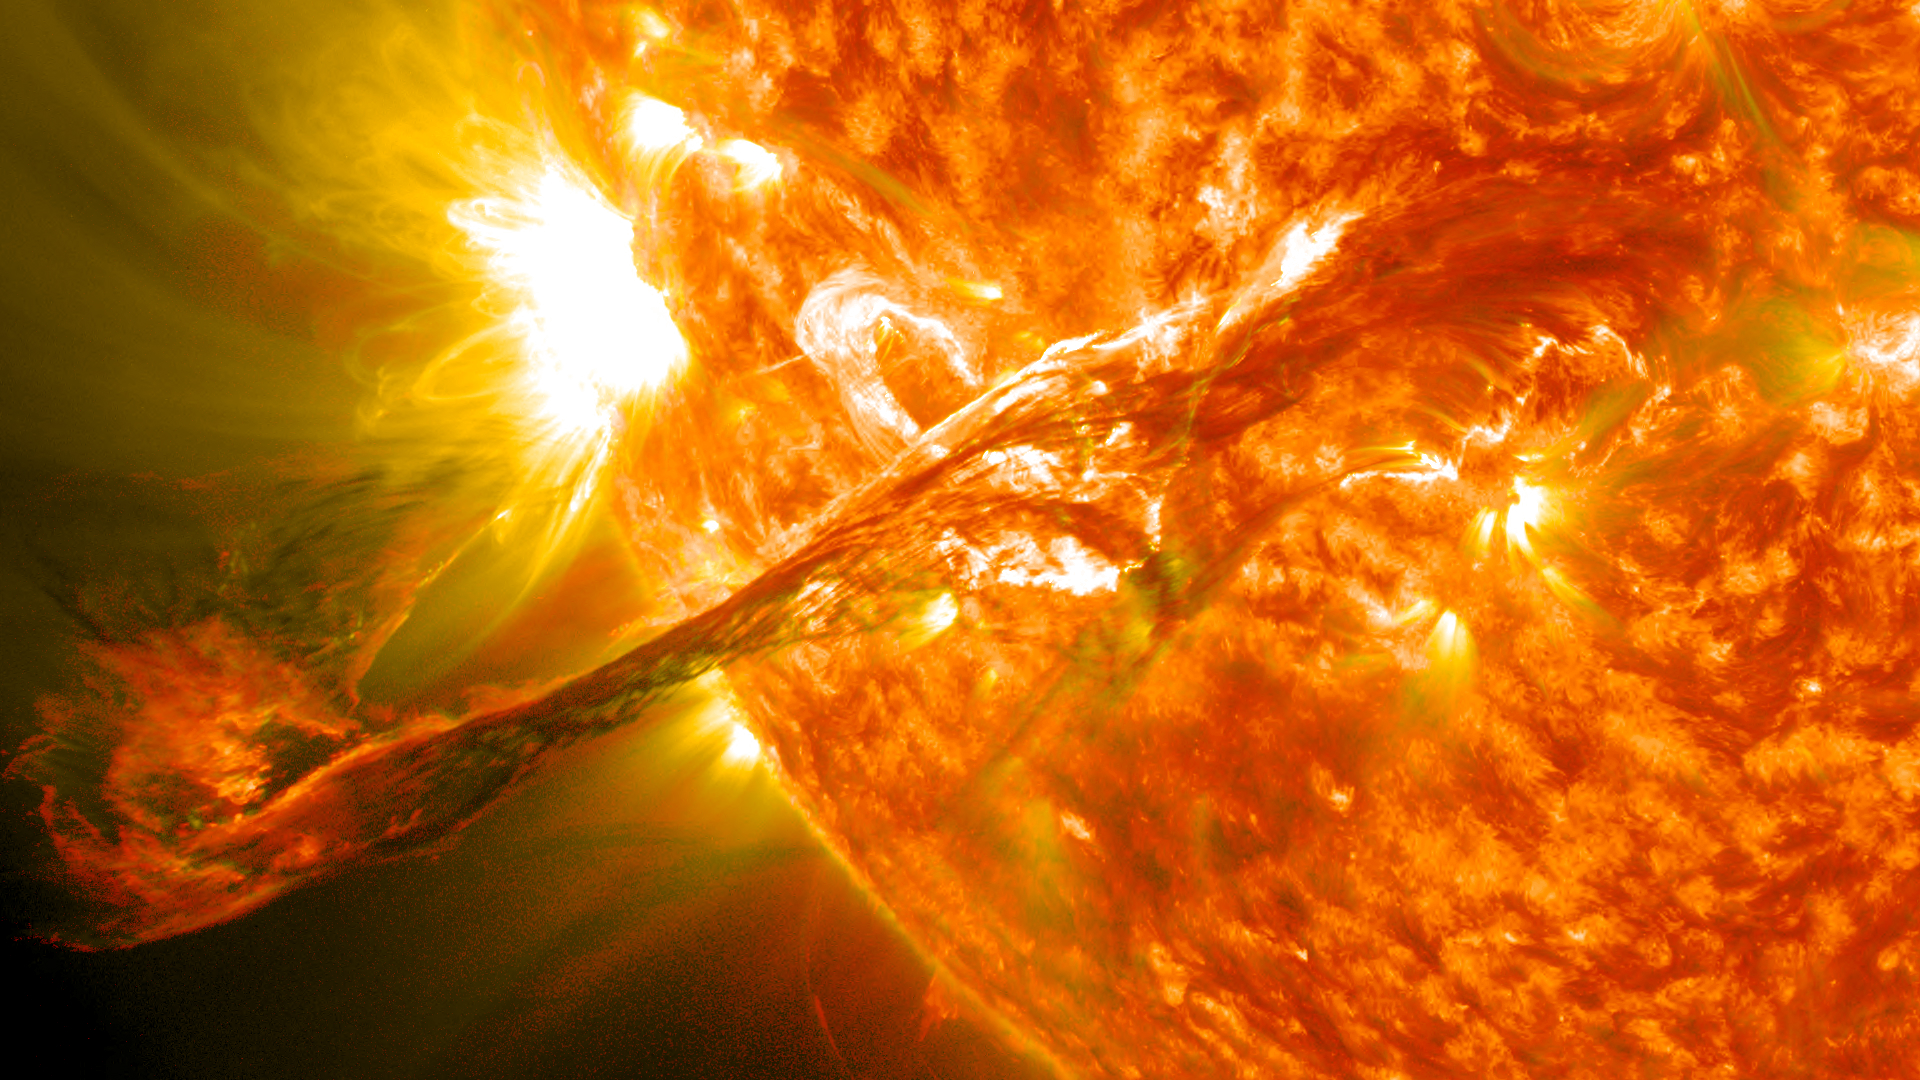 An image of a massive solar flare (or coronal mass ejection) erupting out of the sun in 2017.